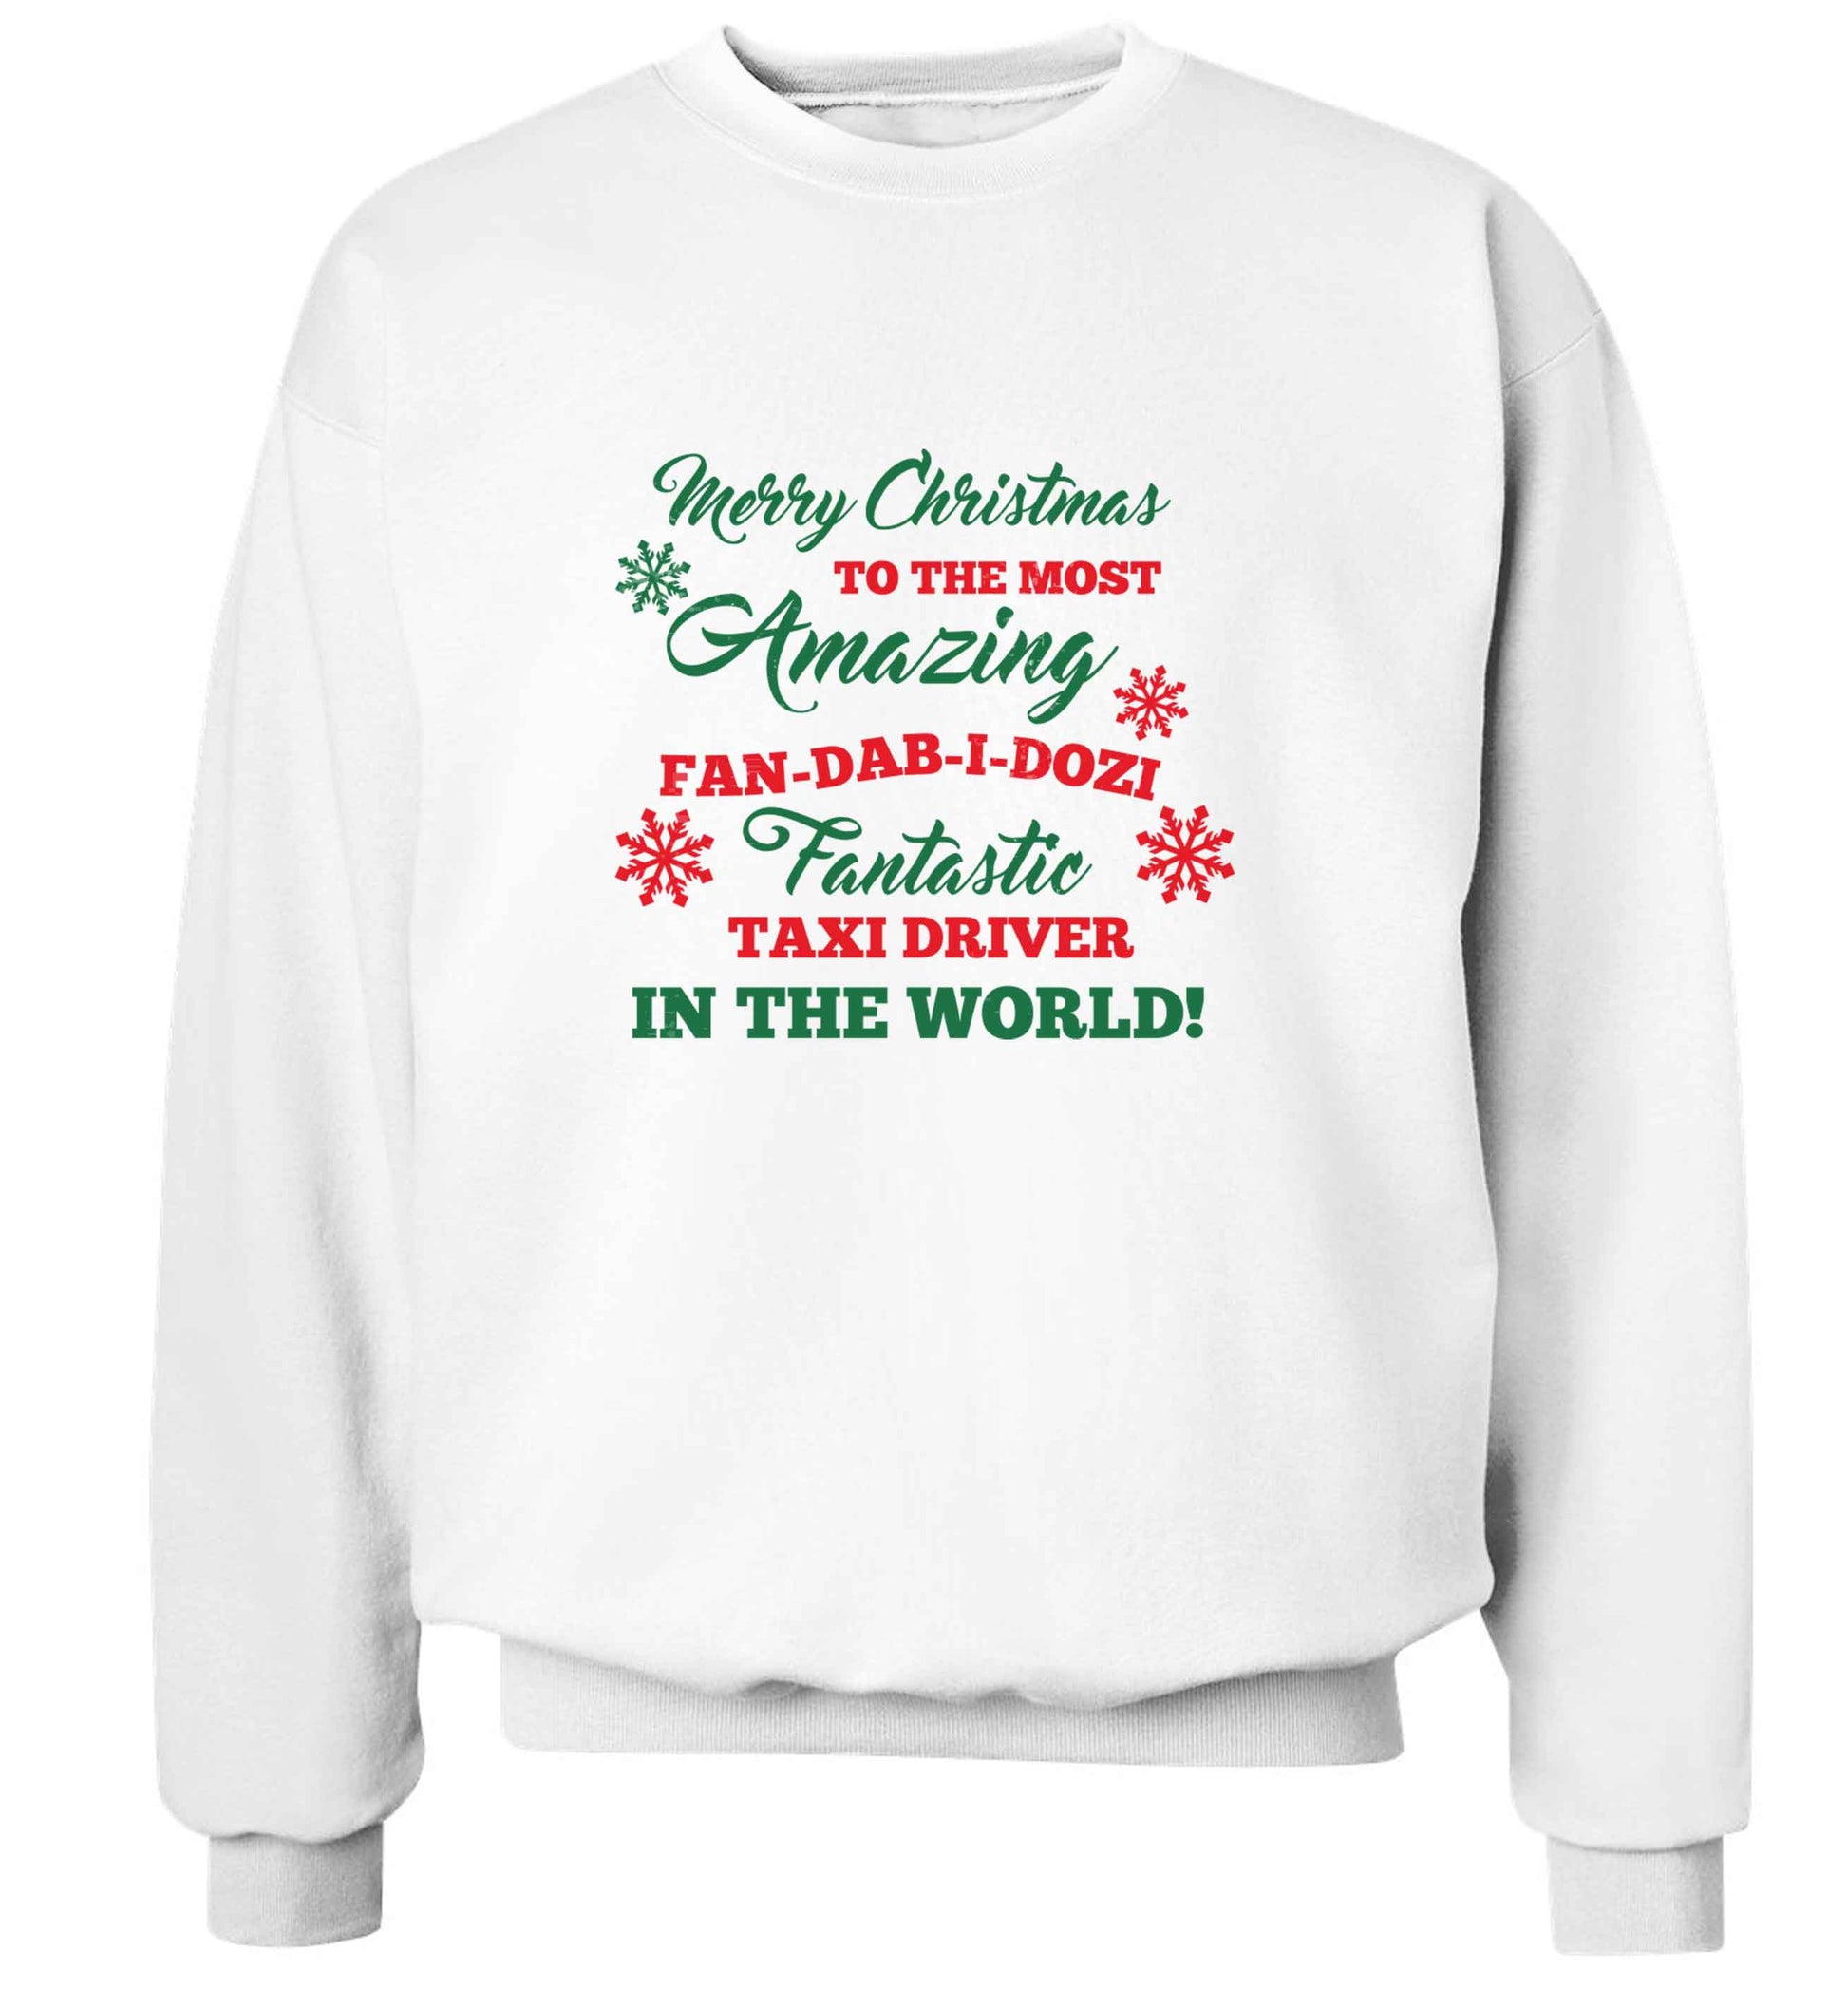 Merry Christmas to the most amazing taxi driver in the world! adult's unisex white sweater 2XL